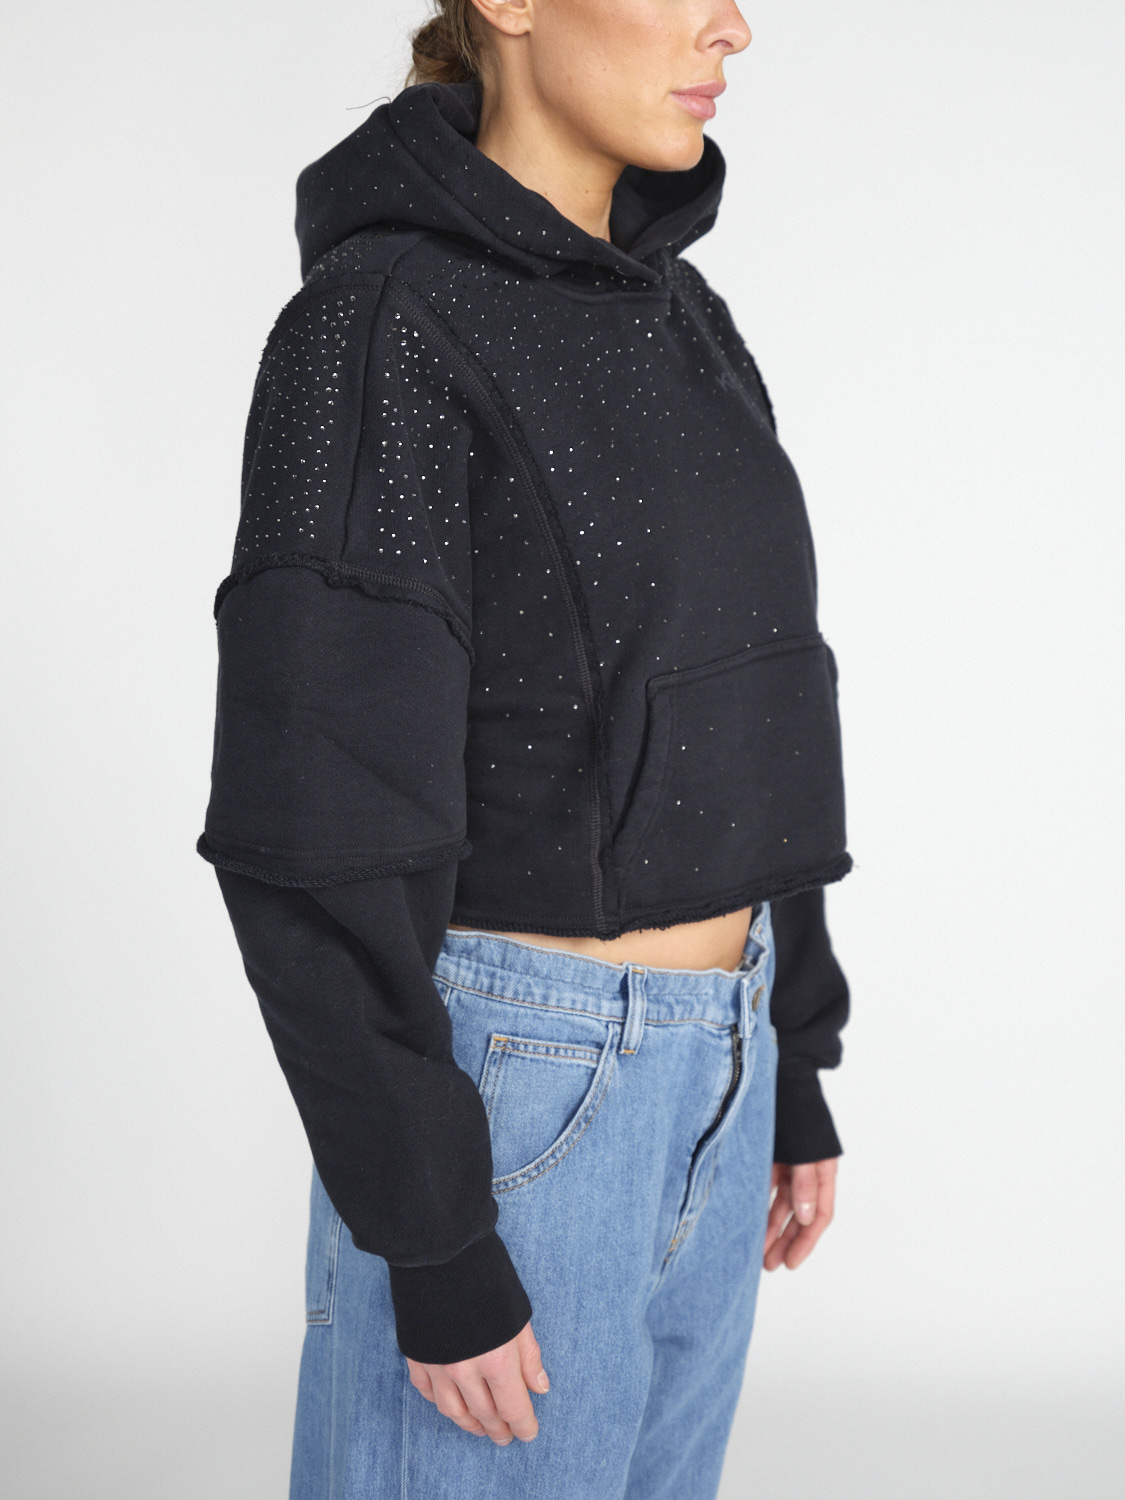 khrisjoy Hoodie Crop - Cropped sweater with glitter details   black XS/S